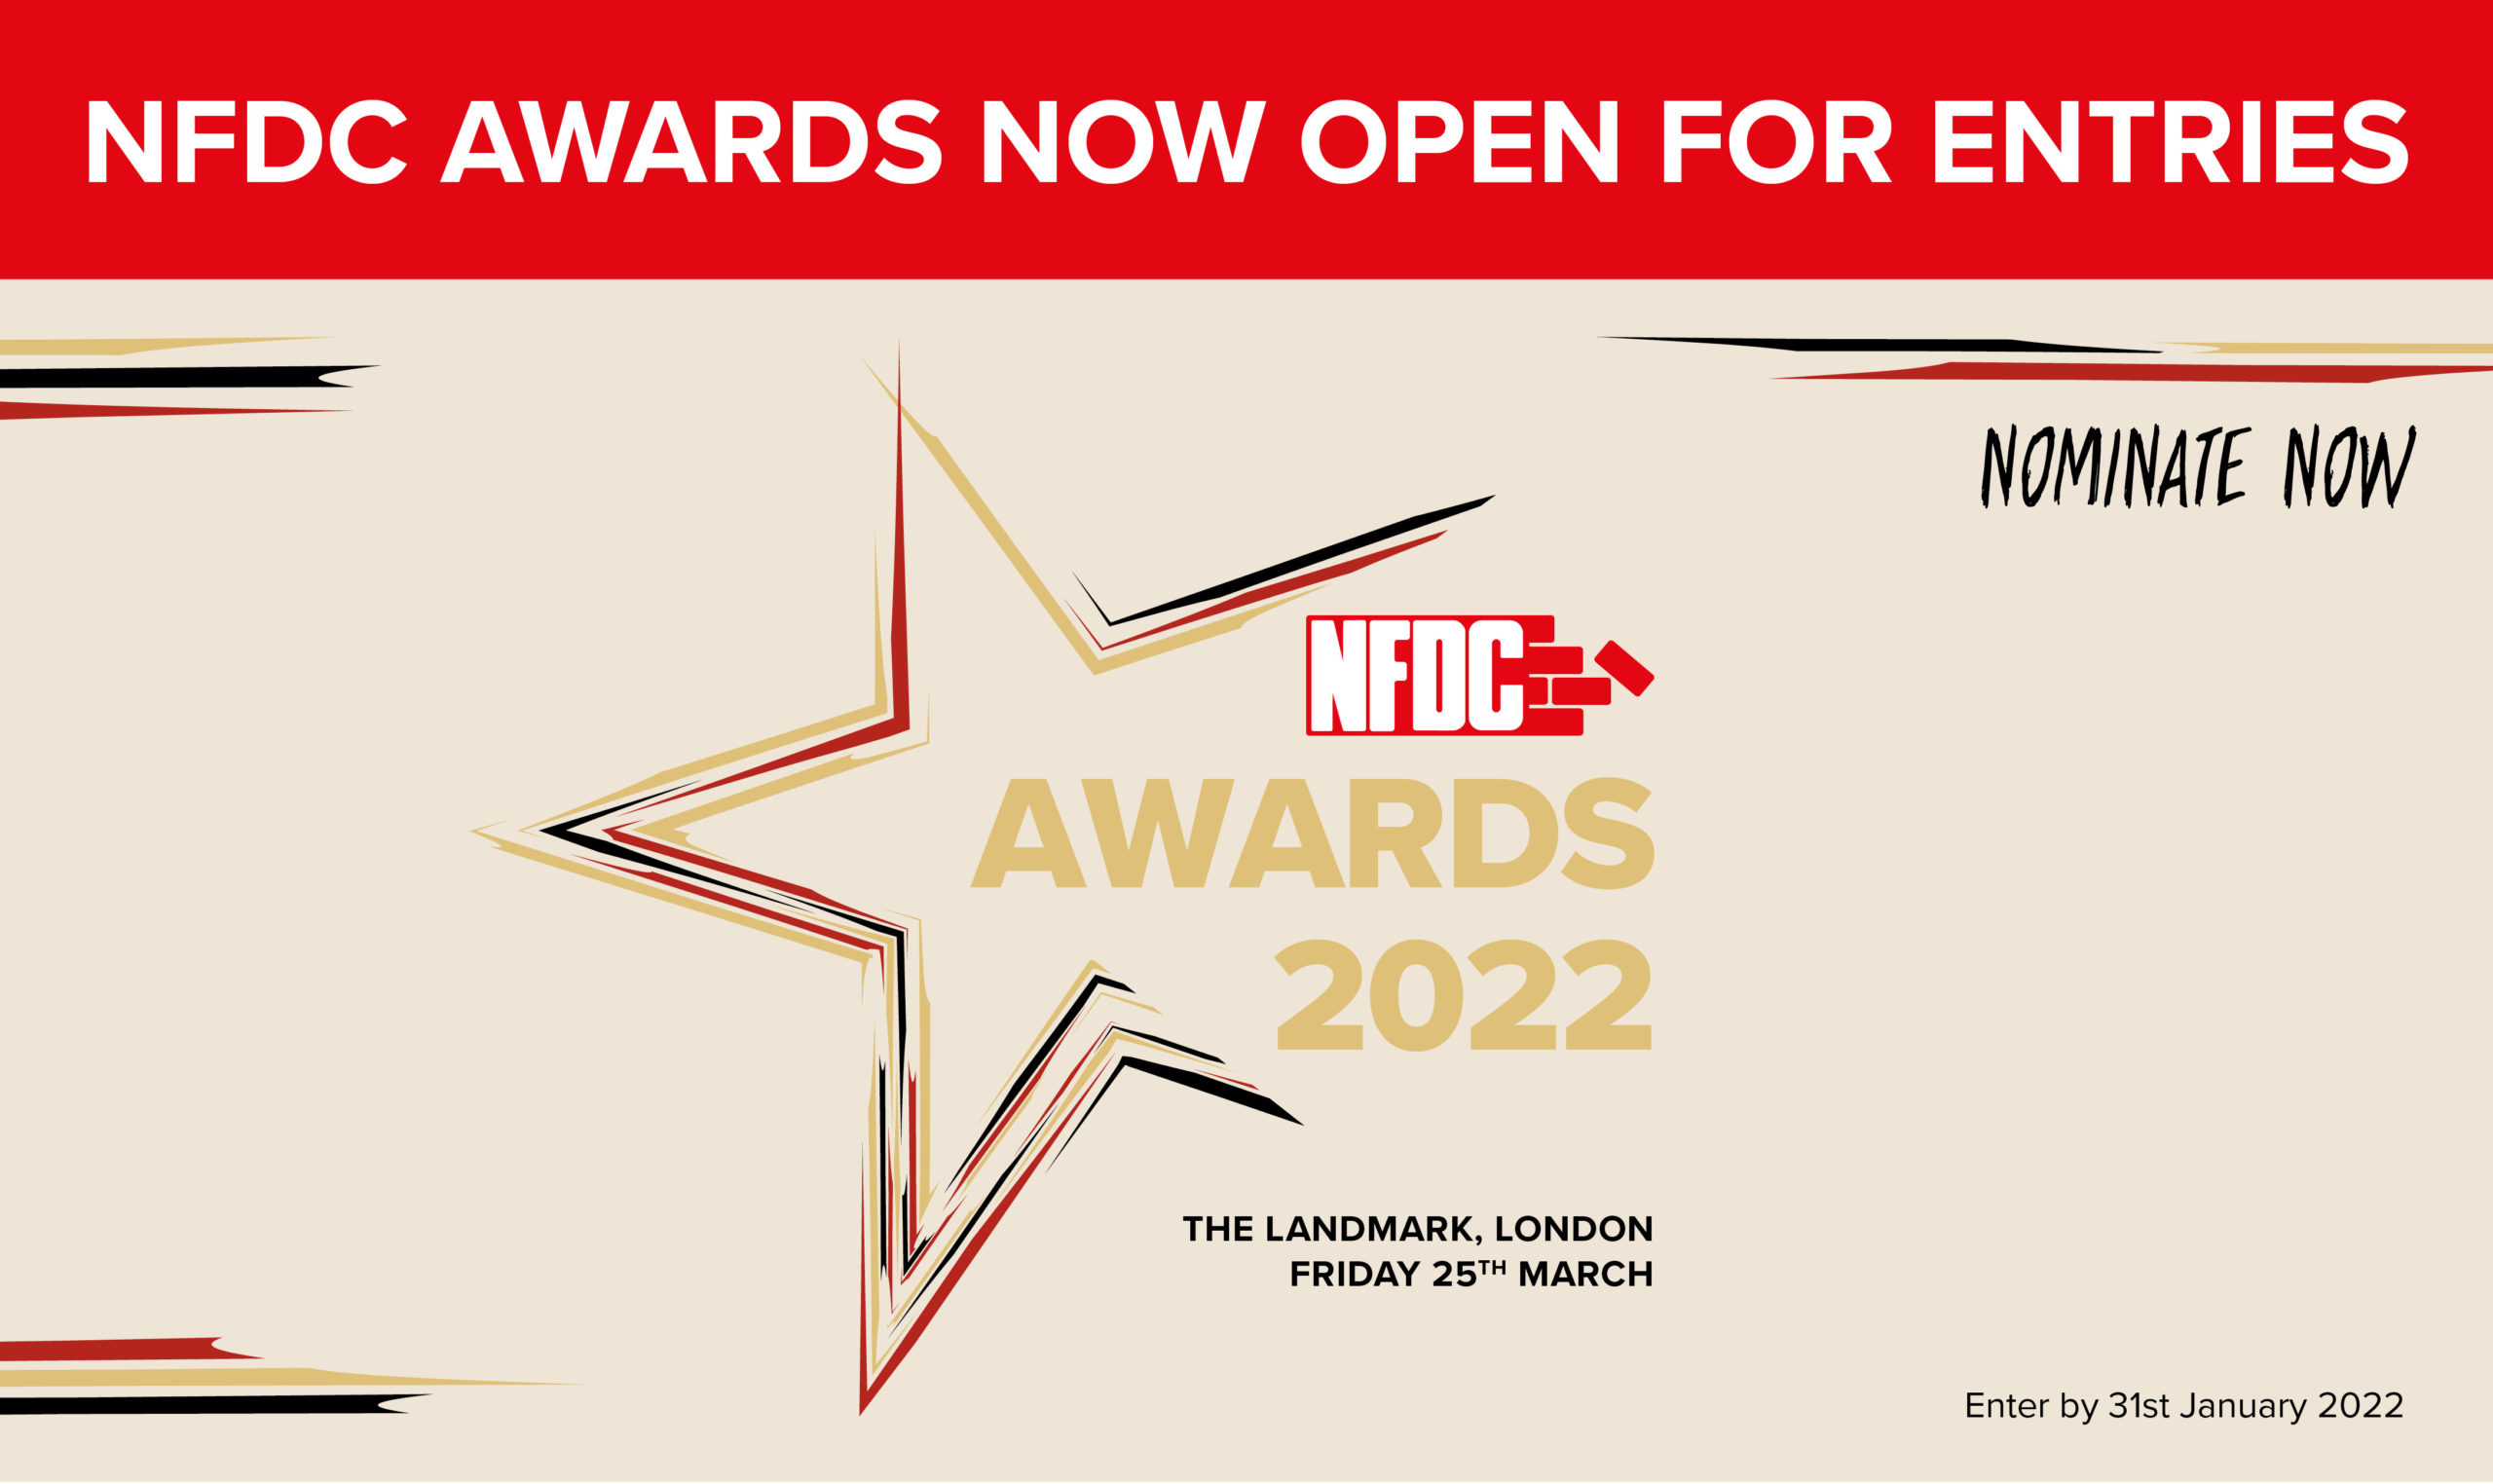 NFDC Awards 2022 Now Open for Notifications